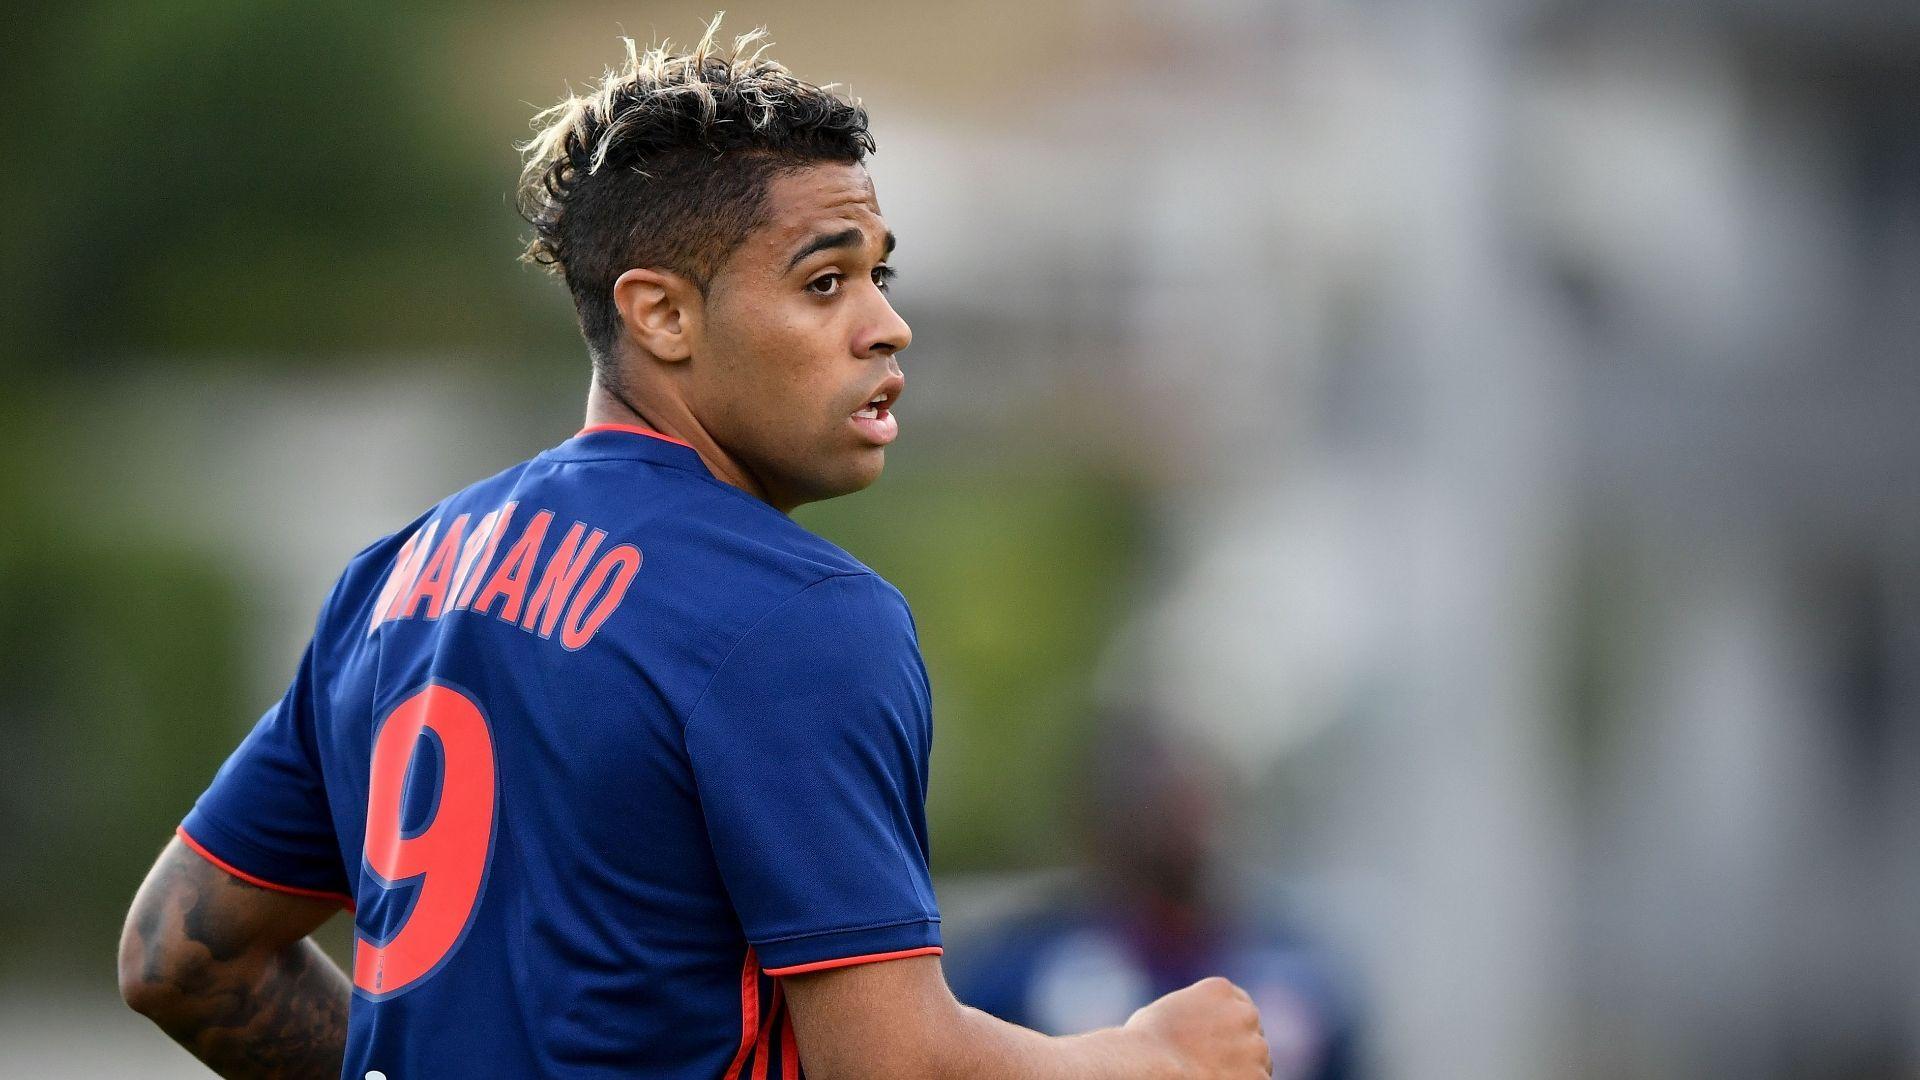 Real Madrid sign former youth player Mariano Diaz Prime Time